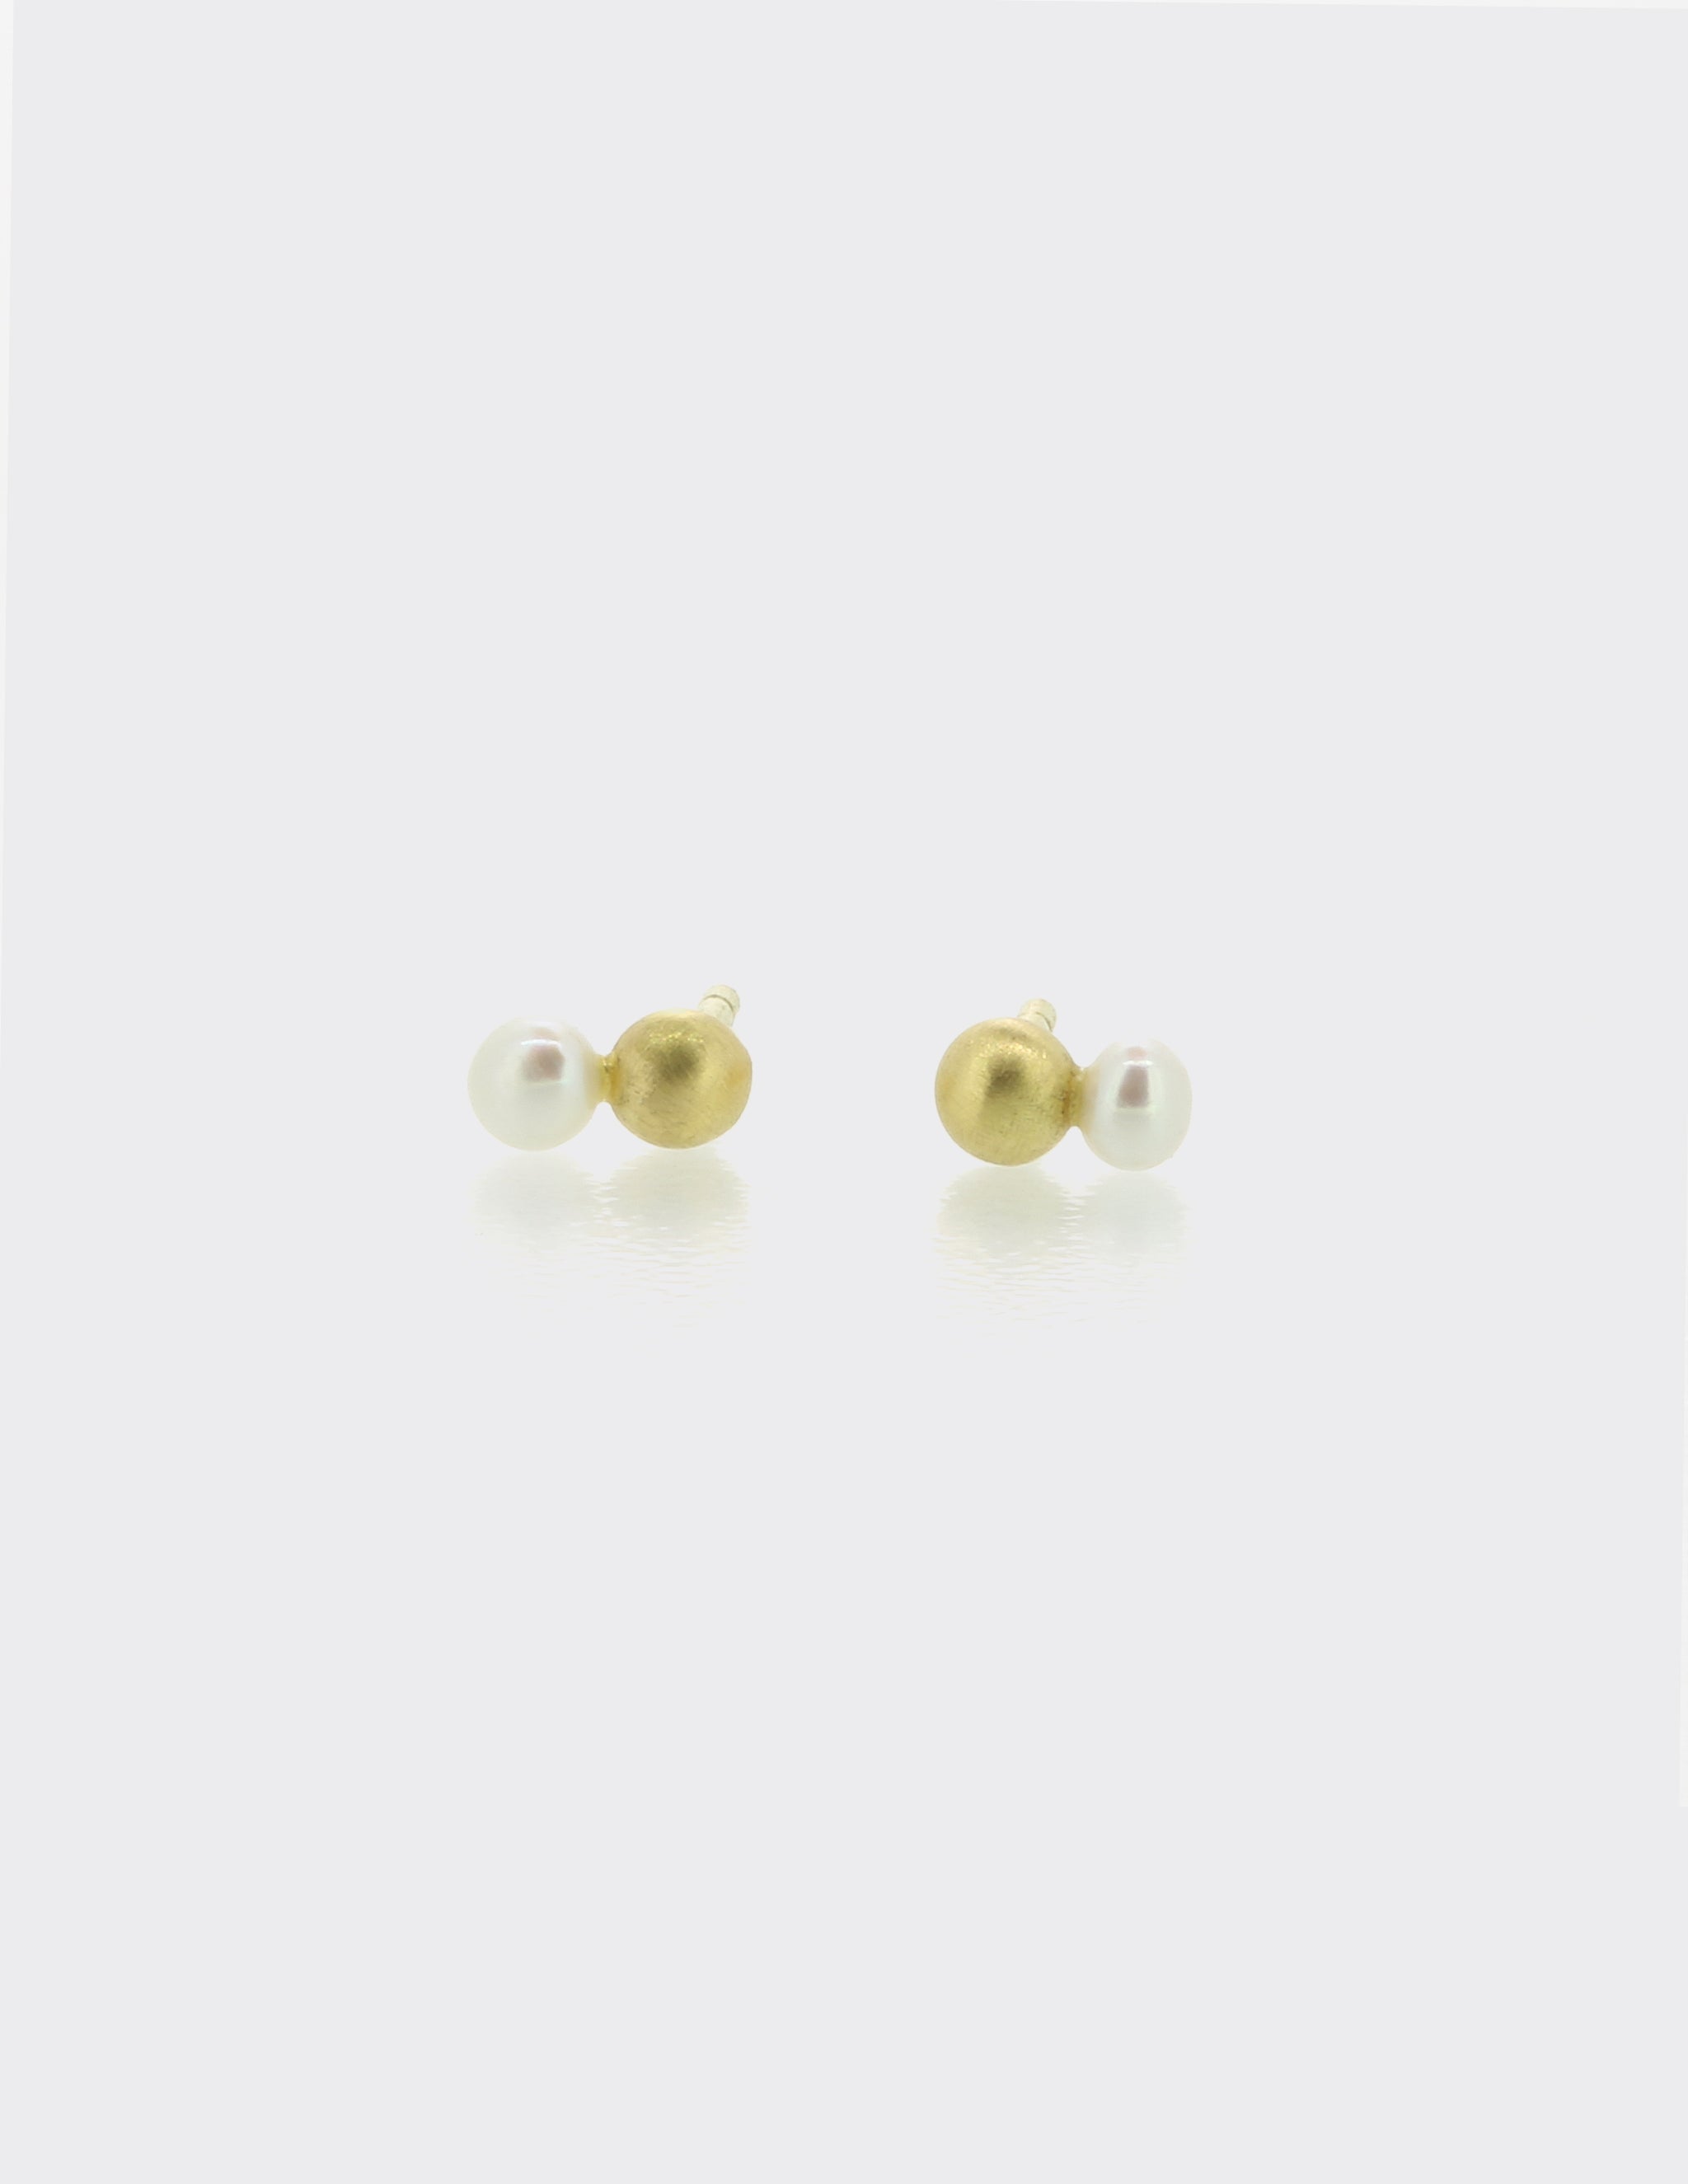 Gold and pearl ear studs